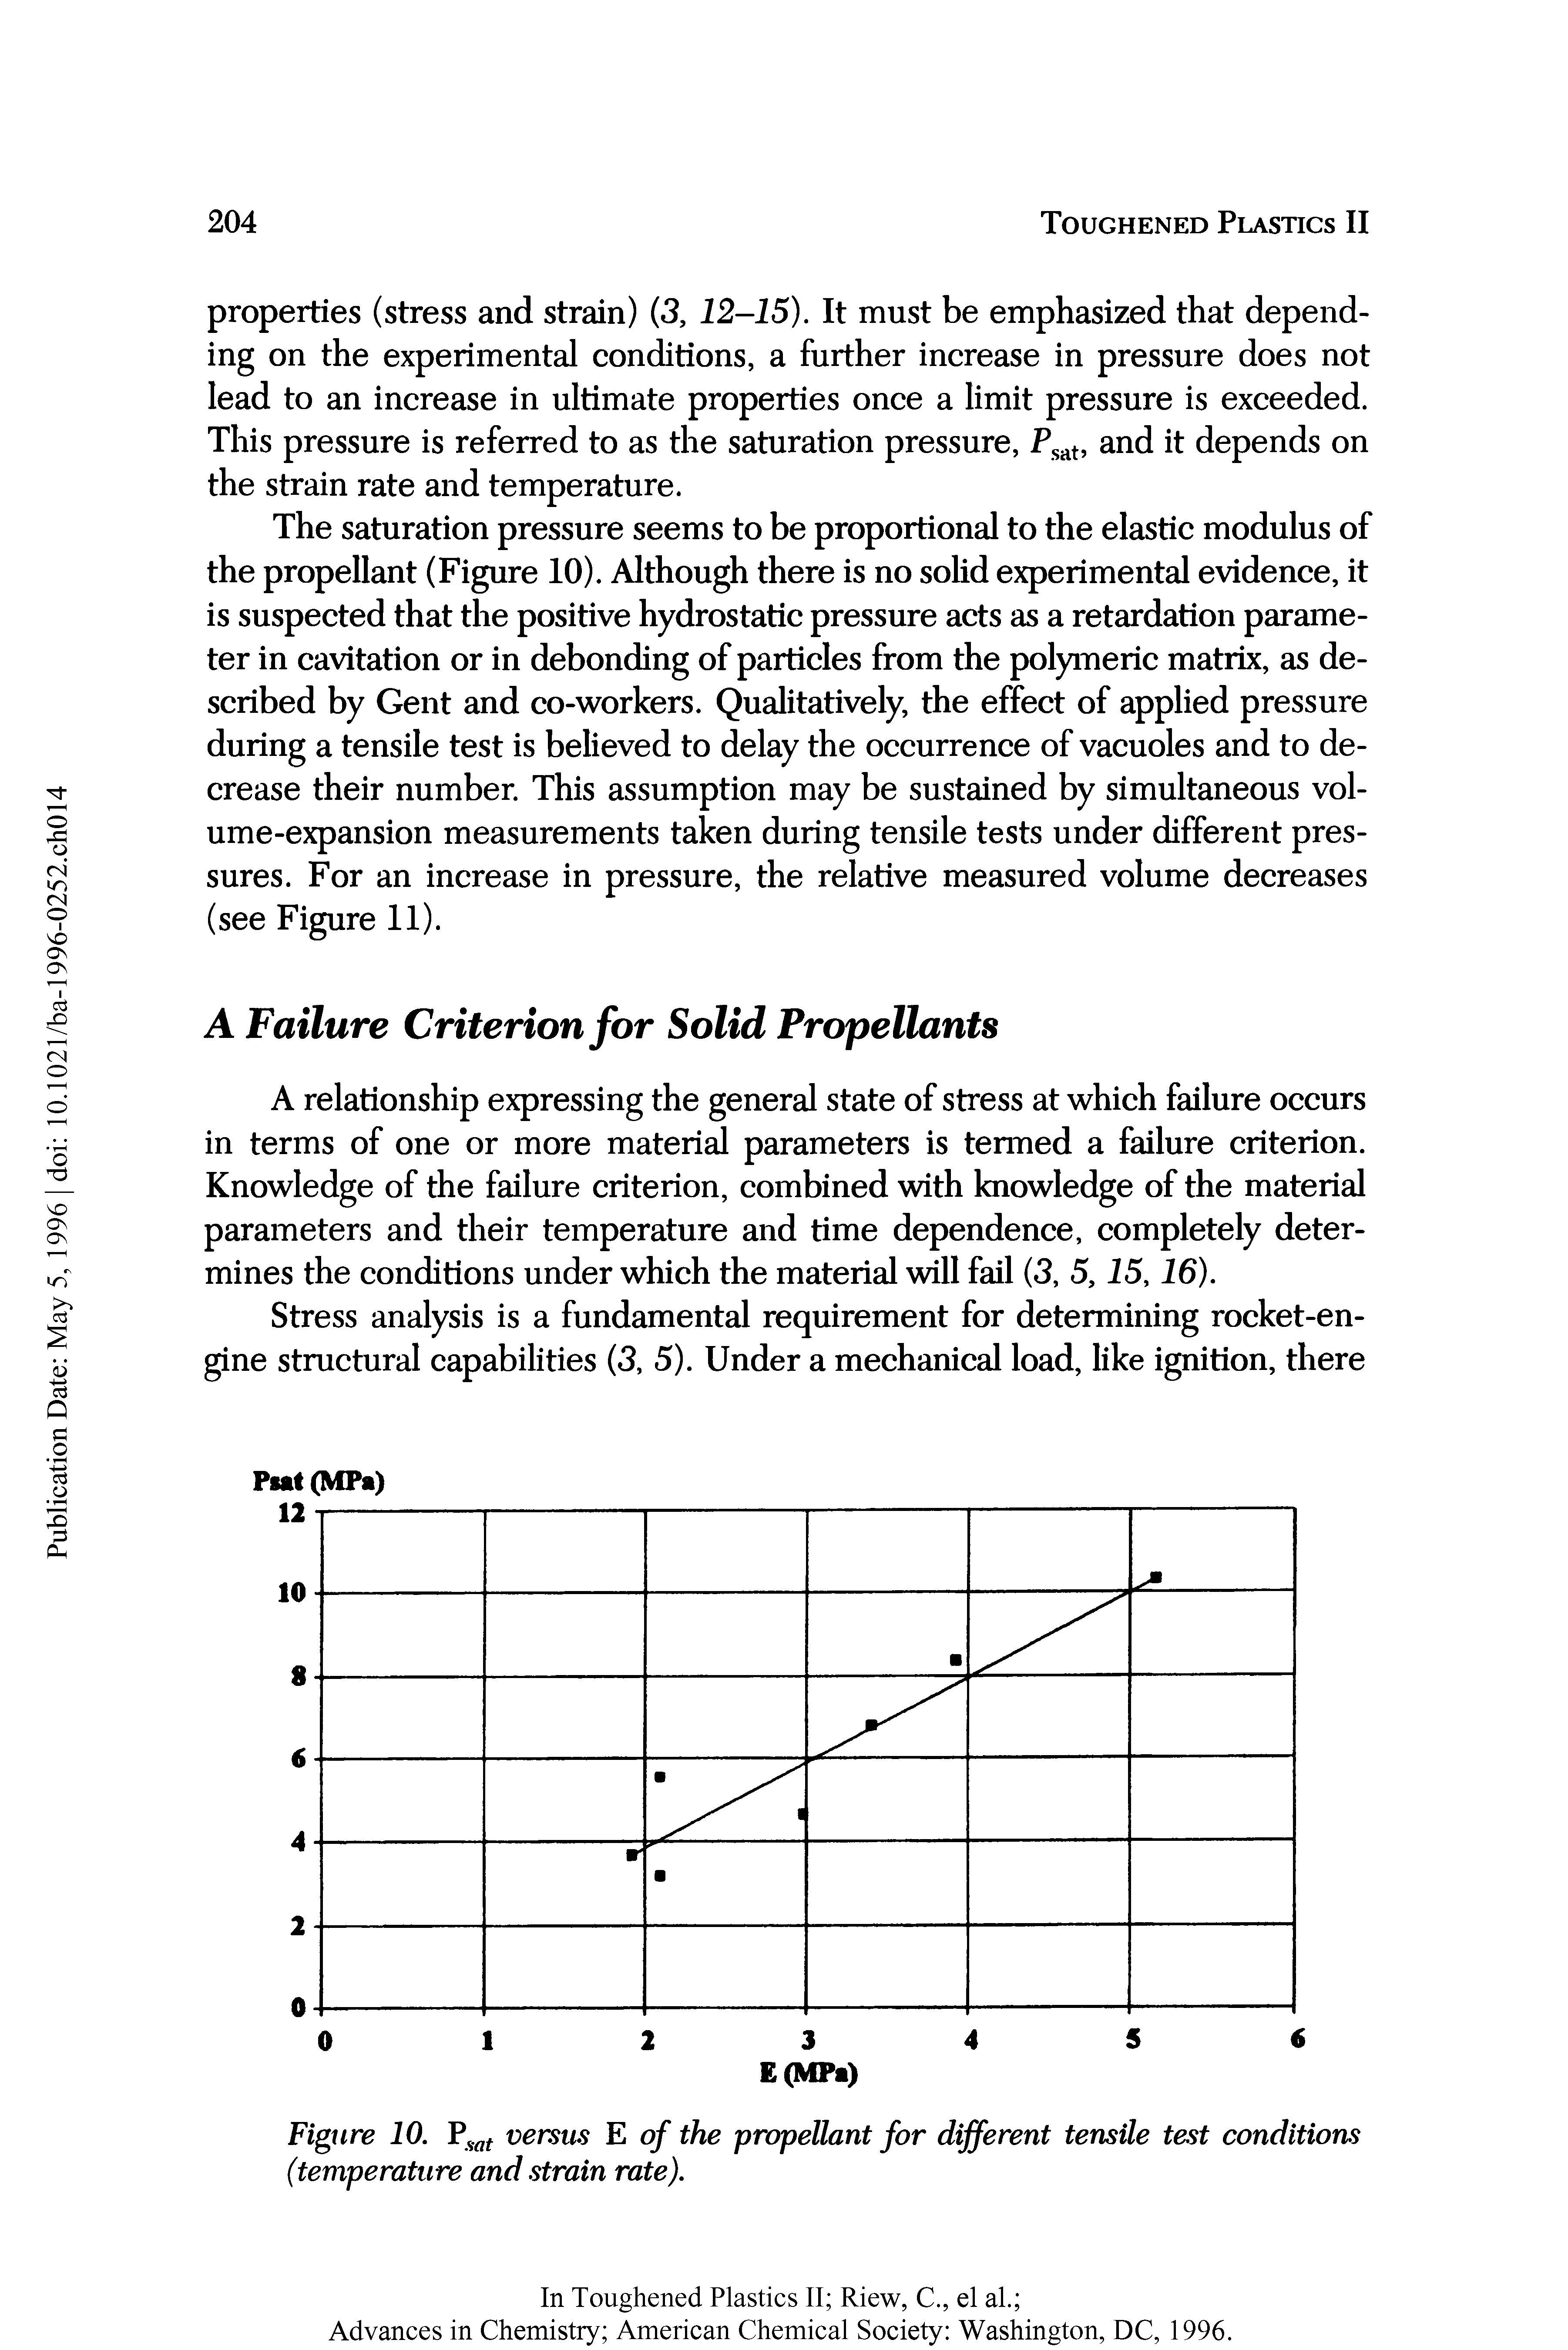 Figure 10. Fsat versus E of the propellant for different tensile test conditions (temperature and strain rate).